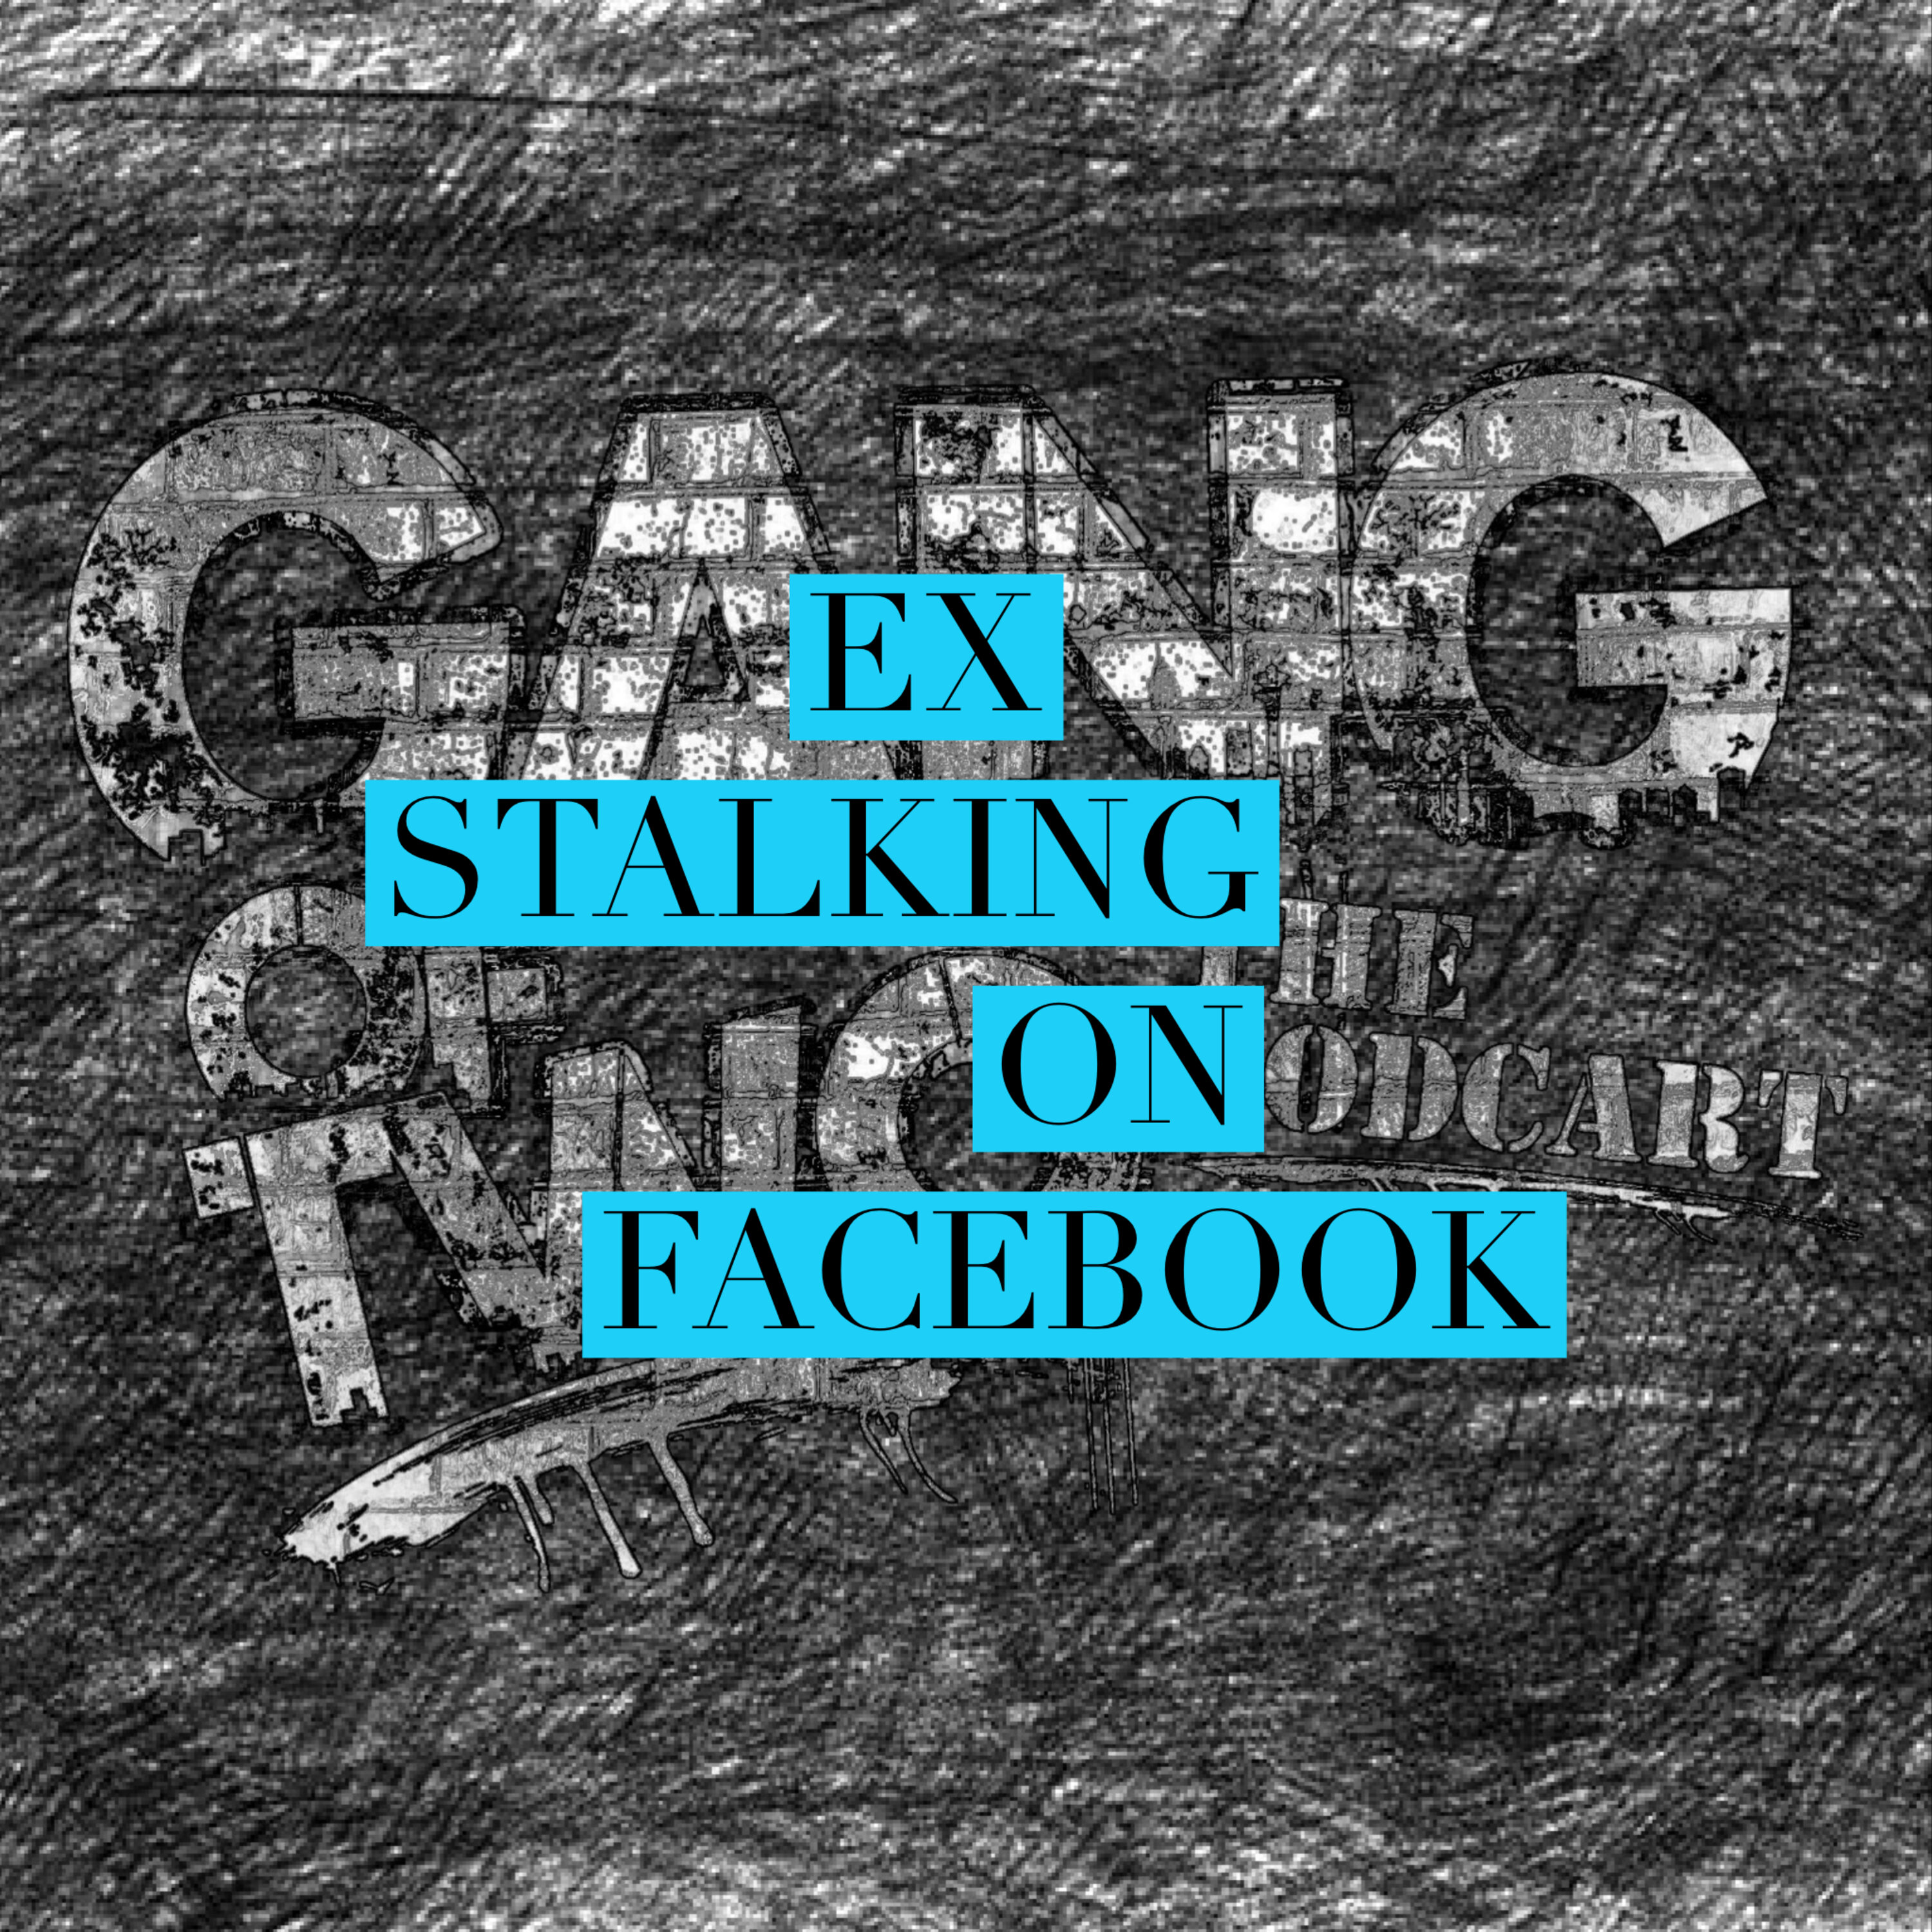 HOW TO DEAL WITH AN EX STALKING YOU ON SOCIAL MEDIA Image